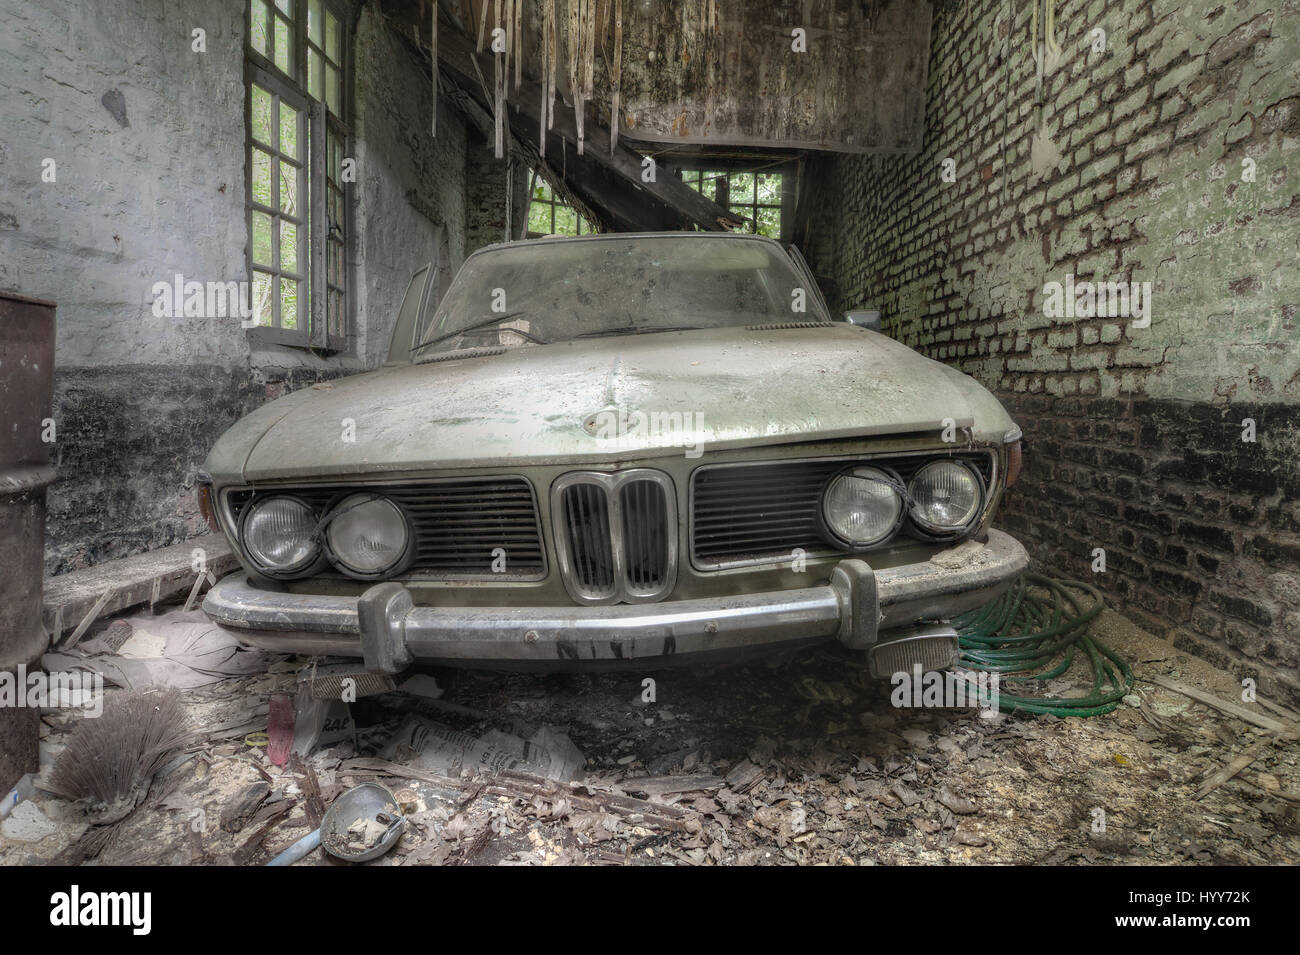 A BMW has been abandoned in a garage. STUNNING images reveal the vulnerable beauty of abandoned cars that have been left to rust over the years. The collection of spectacular images show how a Volkswagen Beetle, Citroën C2 and even a Ferrari have been taken over by nature and piles of rubble. In other shots, a Mercedes Benz is overgrown with ivy and an old-fashioned BMW has been left in a garage with a collapsing roof and debris on the floor. A Ford vehicle has also been forgotten in the woods and one car even appears to have a tree growing from it. The haunting images were taken by Belgian se Stock Photo